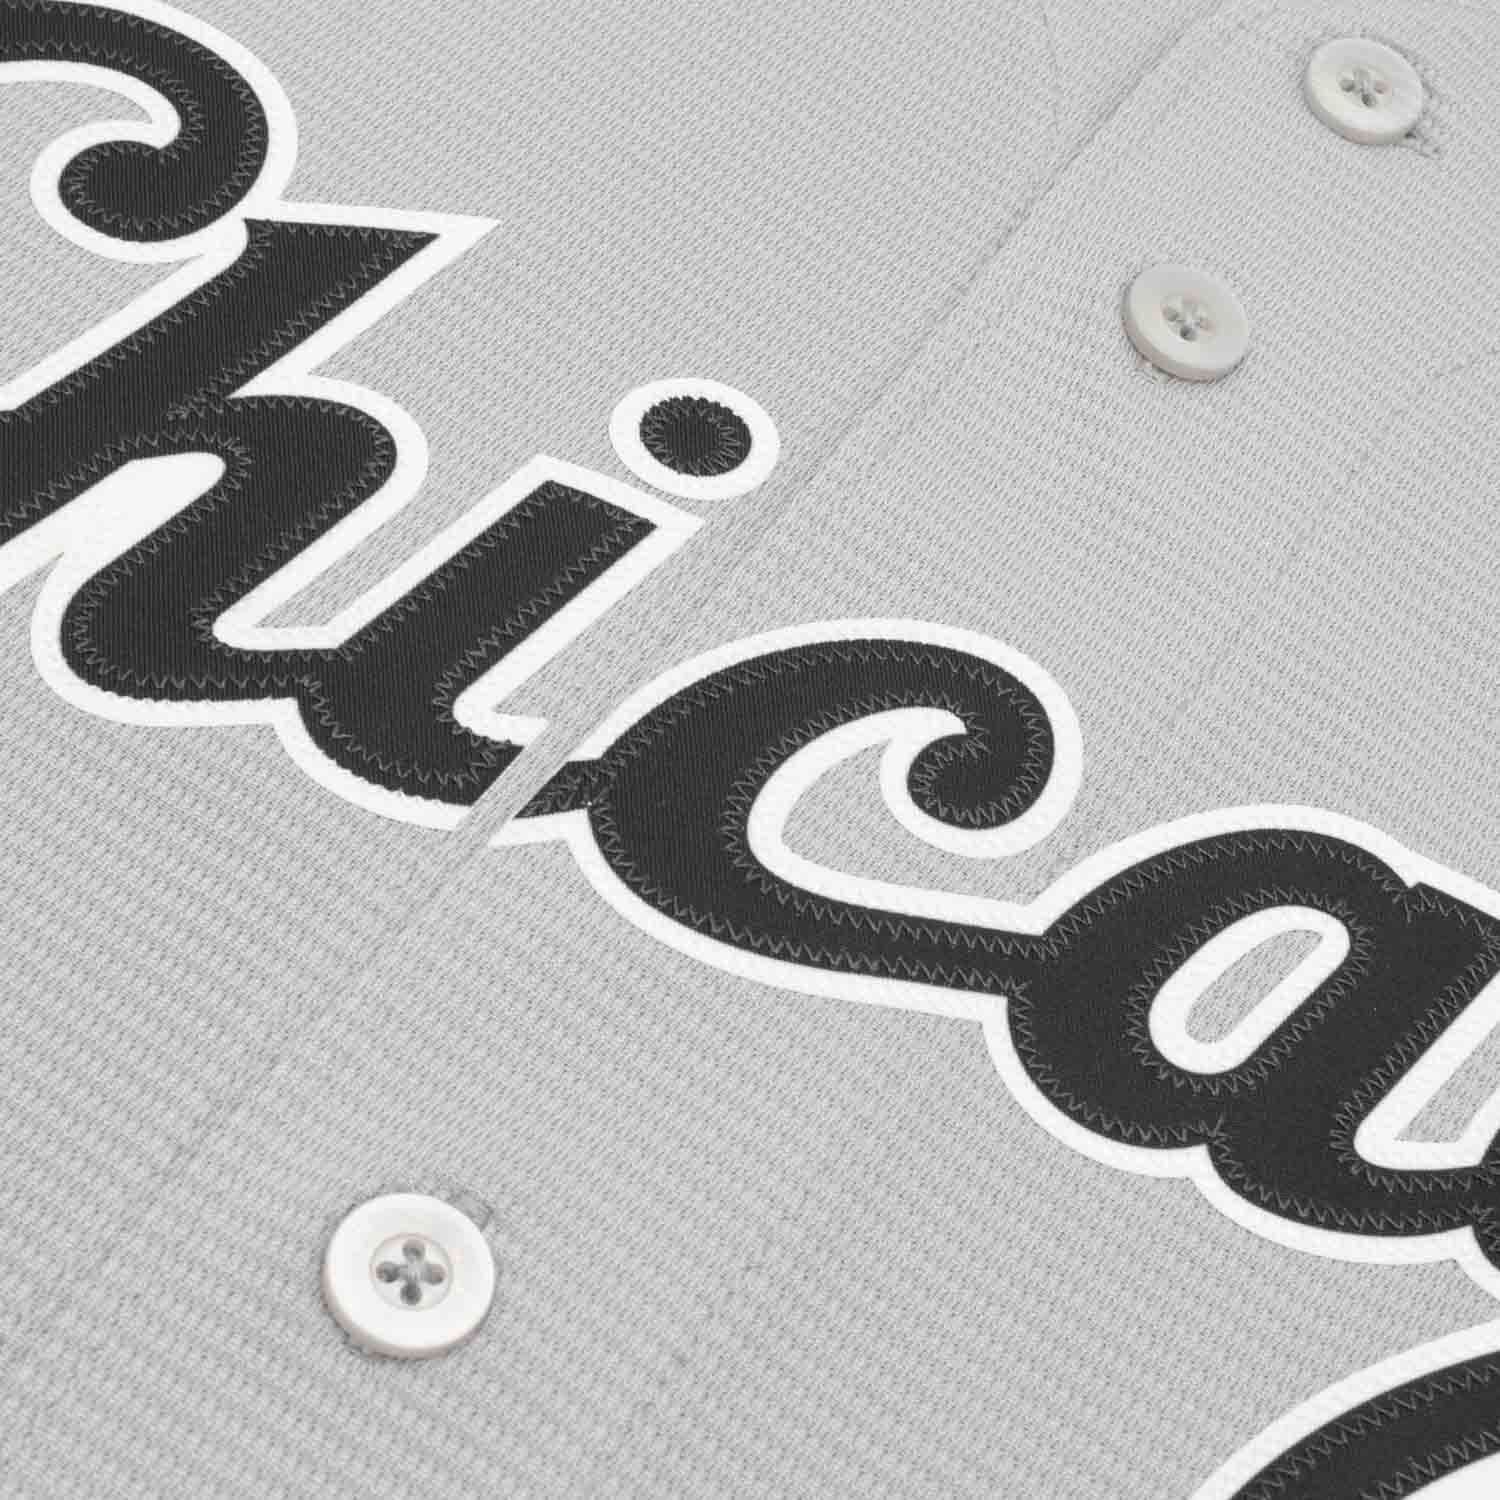 Chicago White Sox Official MLB Replica Road Jersey Grey Nike